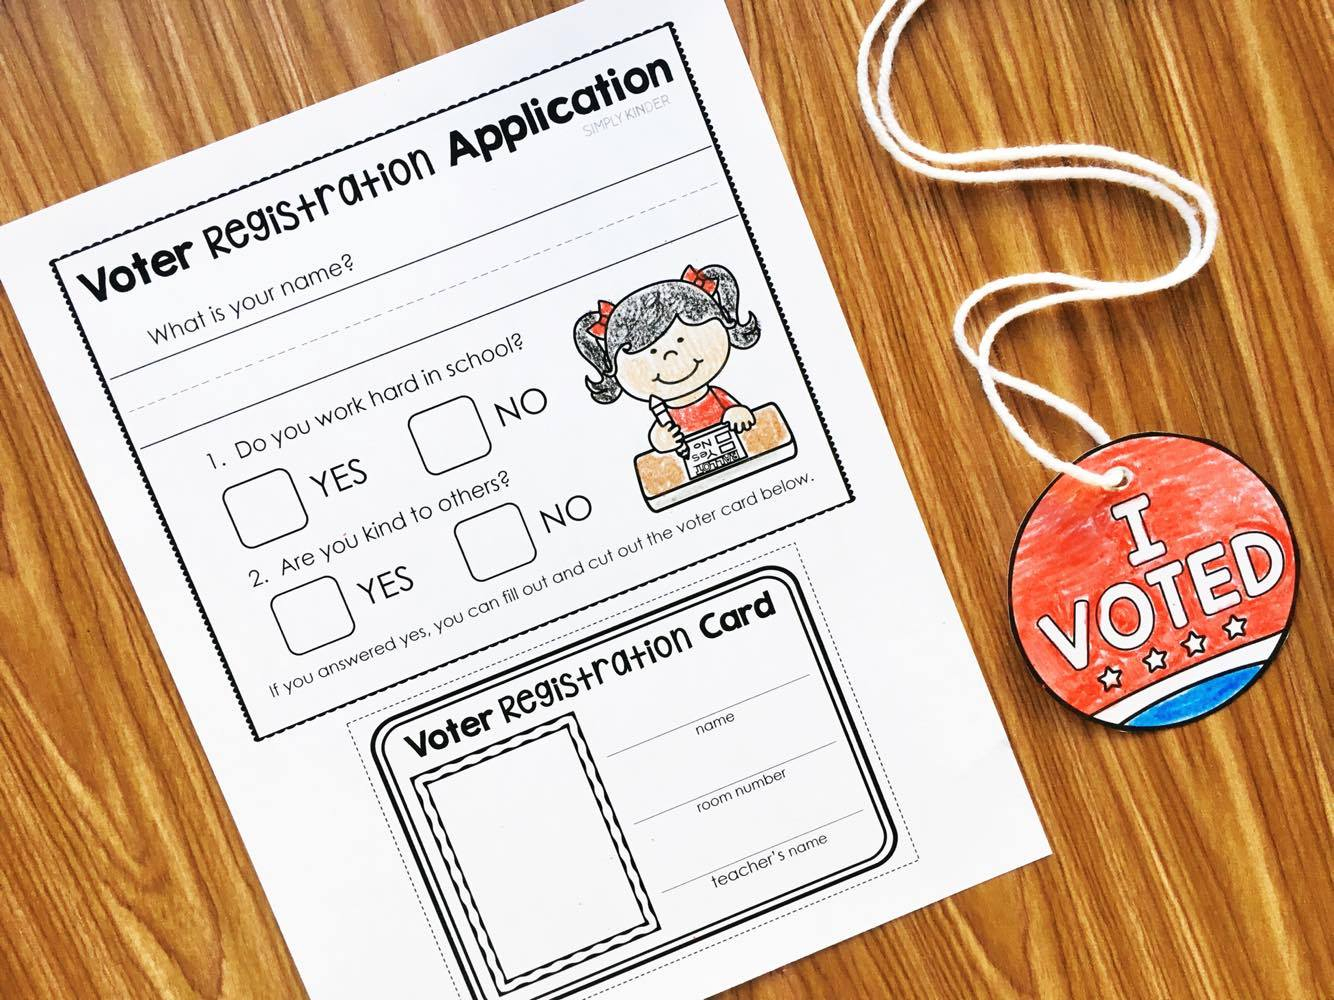 Election Day Activities For Kinder